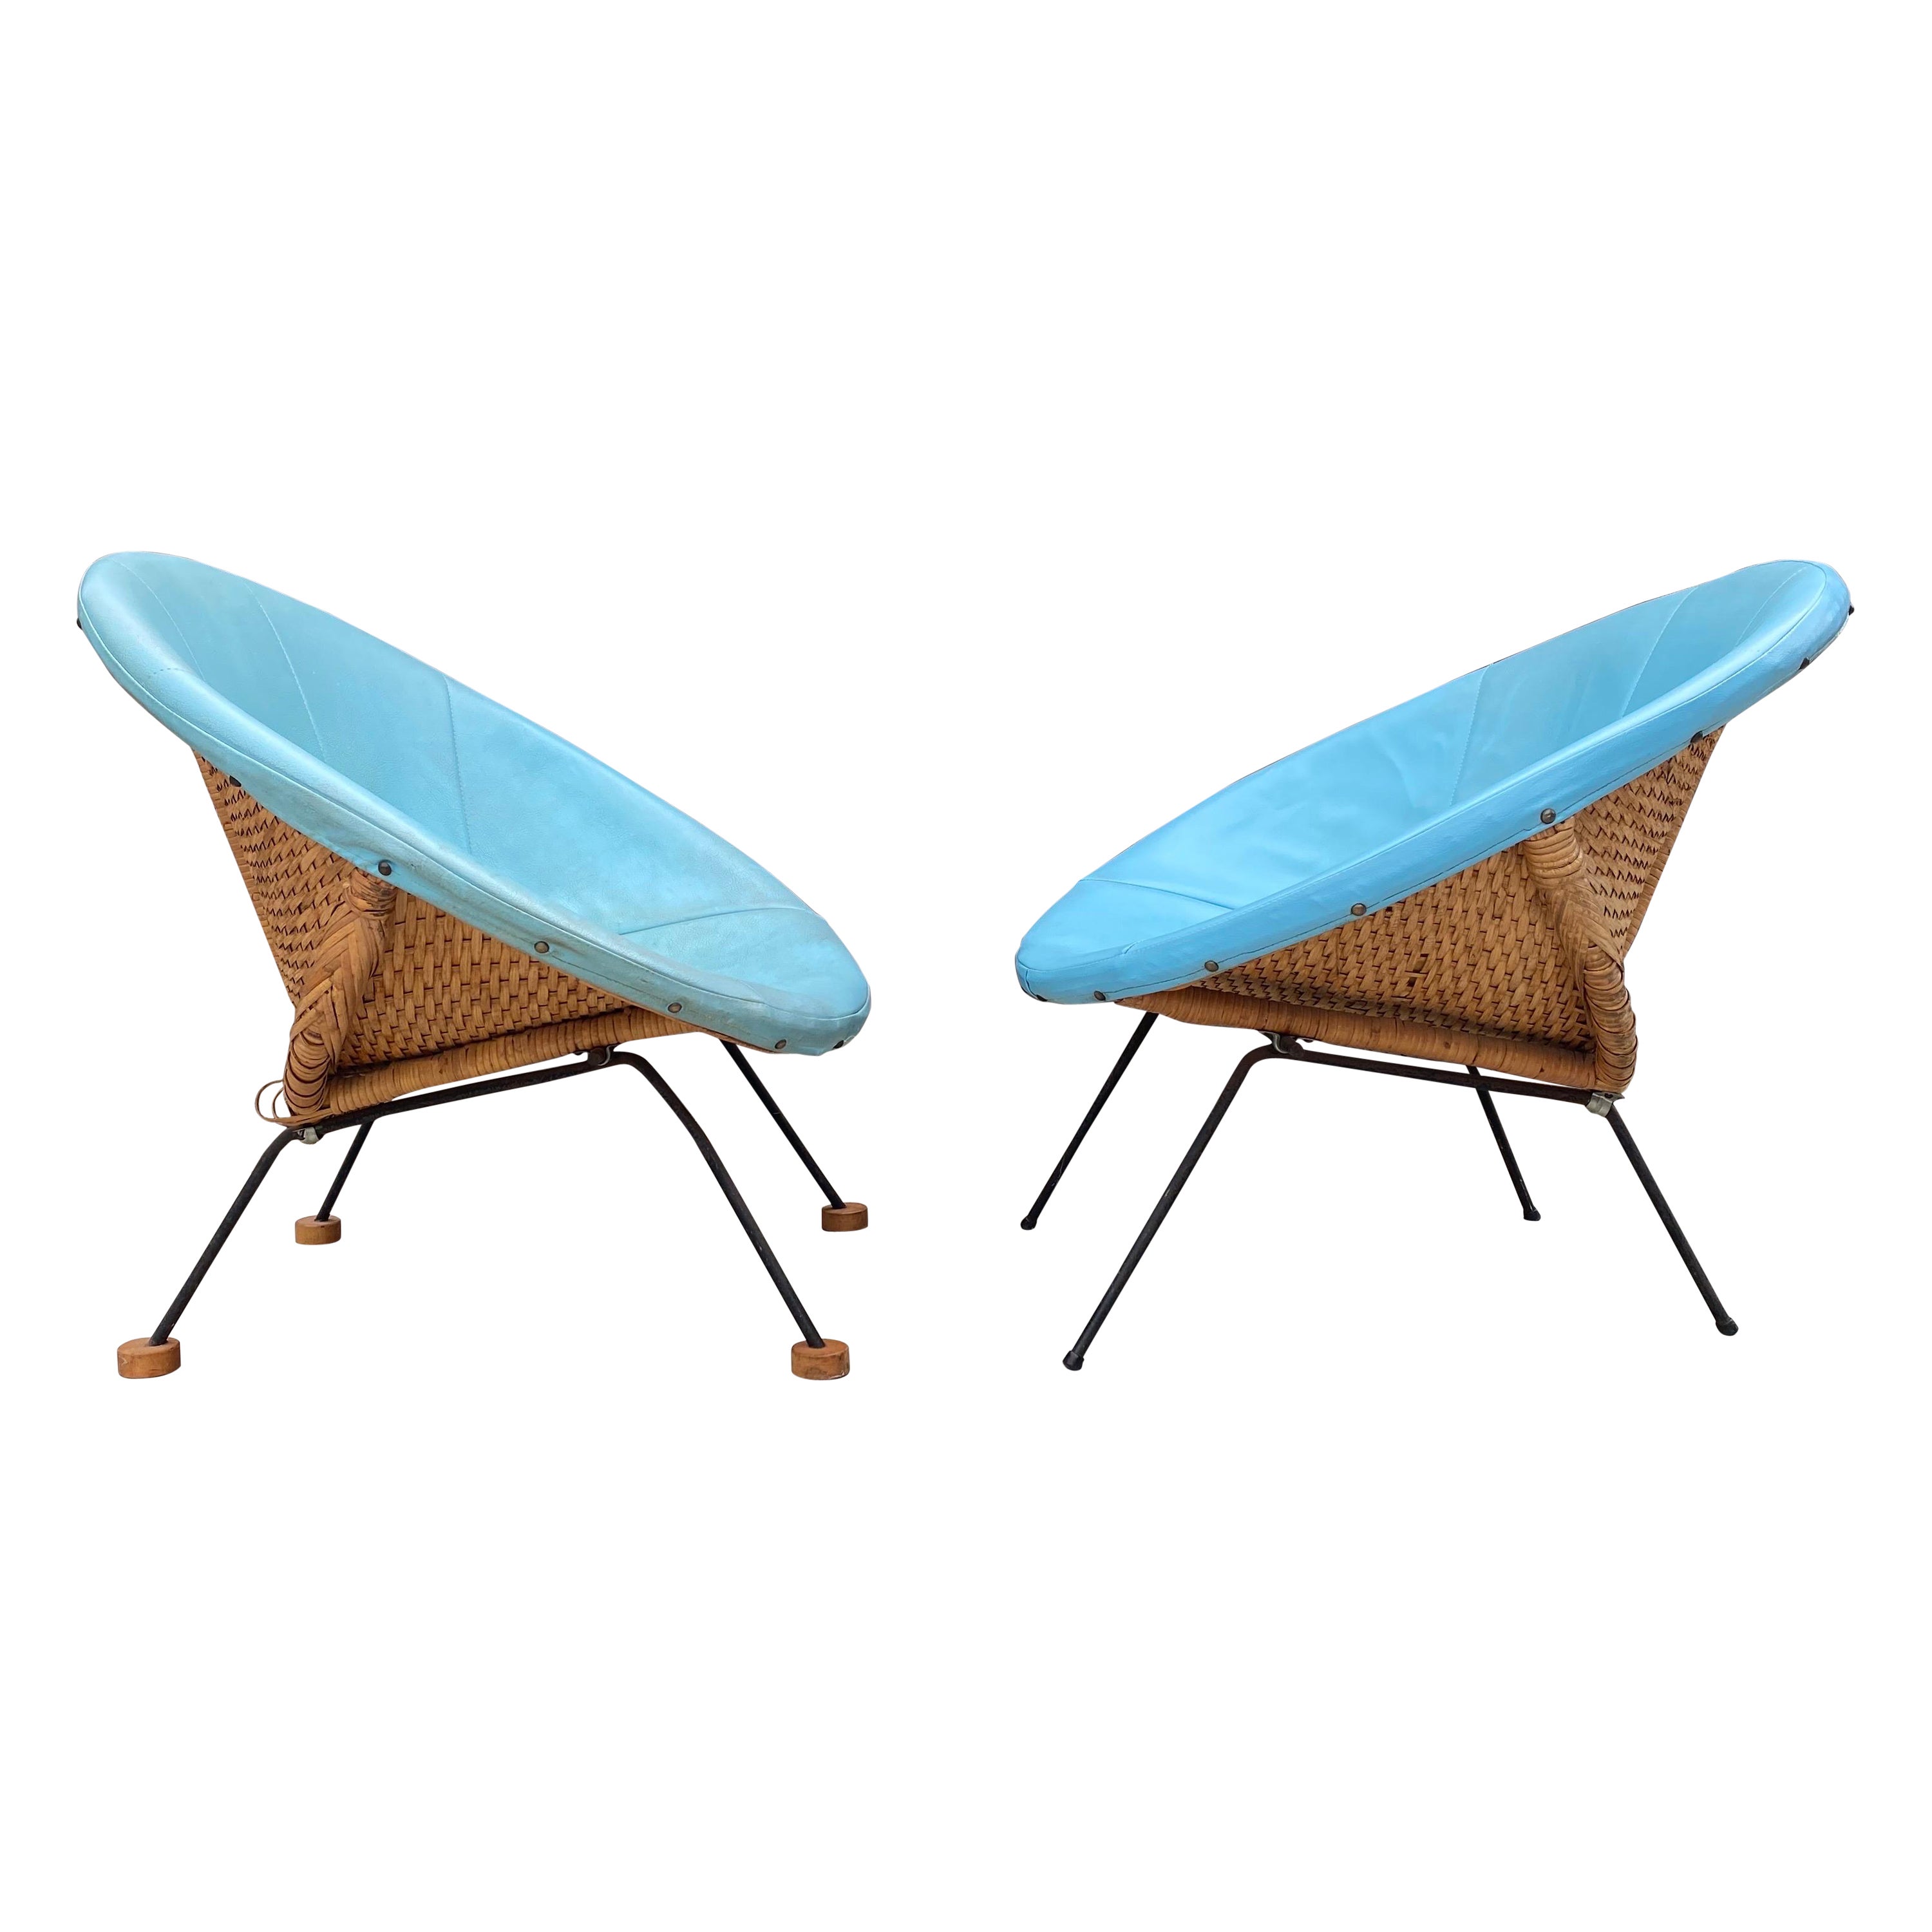 Mid-Century Modern Boho Chic Turquoise Rattan Scoop Chairs, a Pair For Sale